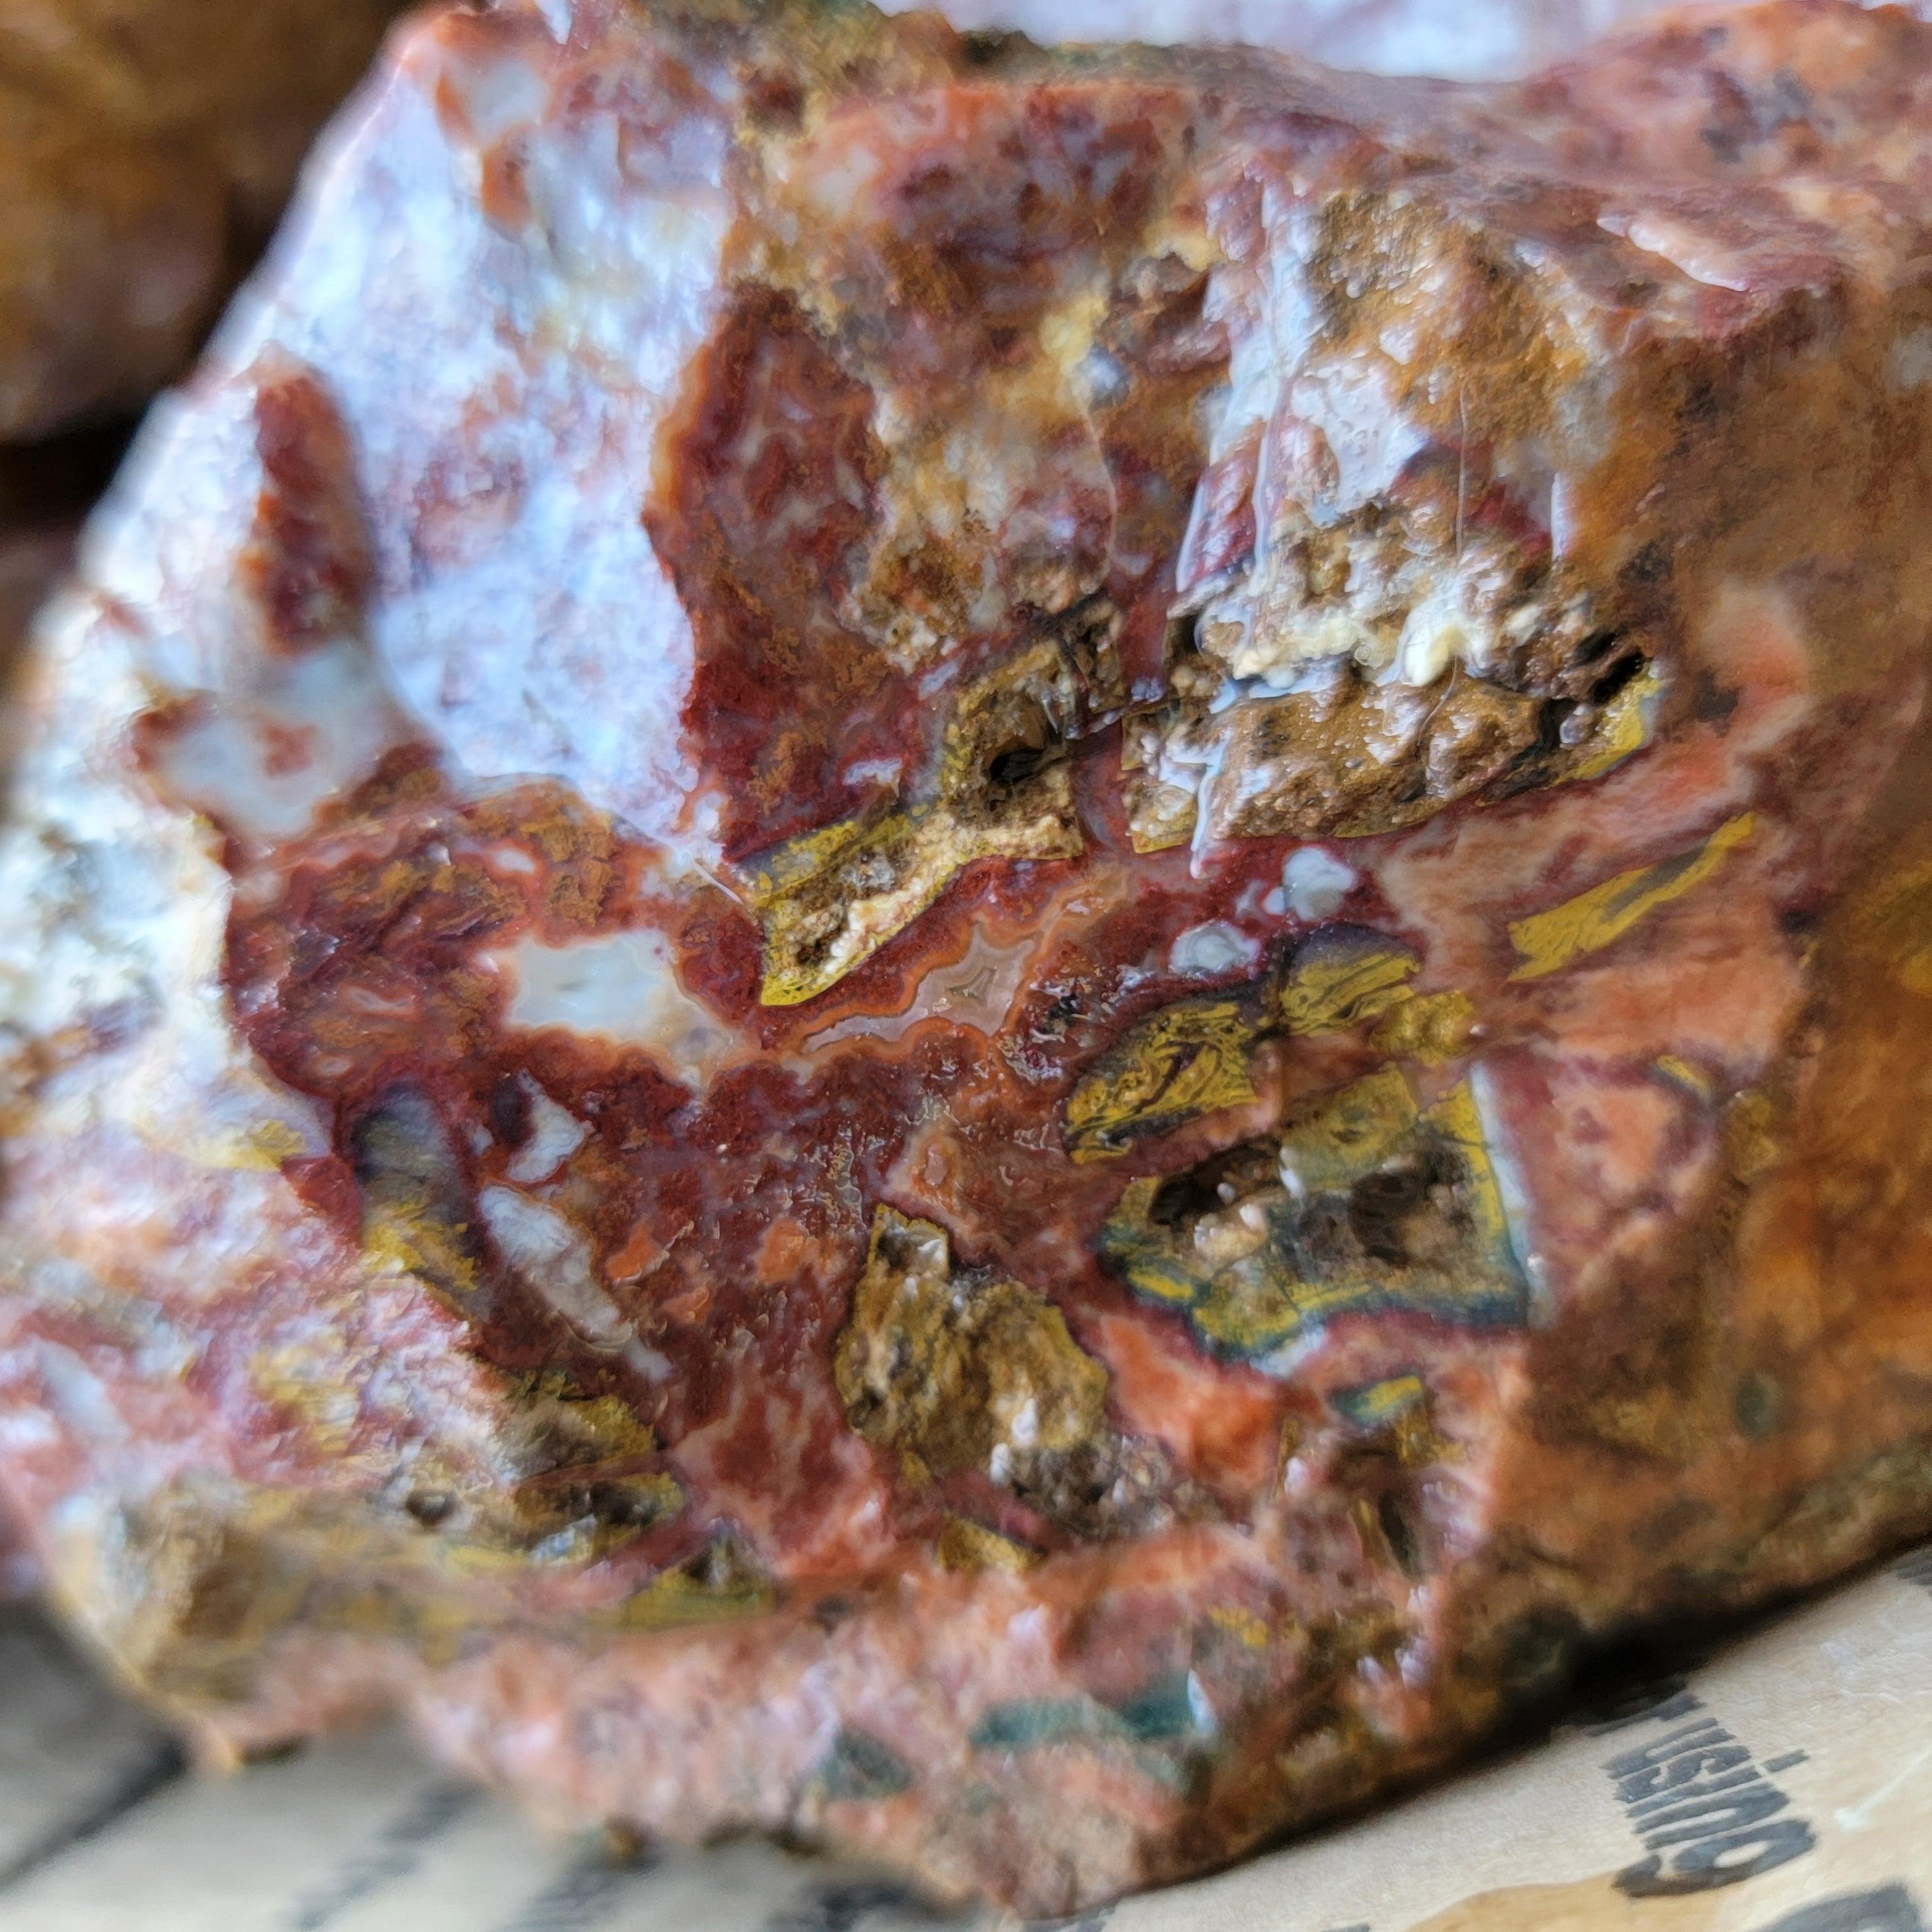 Apple Valley Agate Cutting Rough Flatrate! - LapidaryCentral